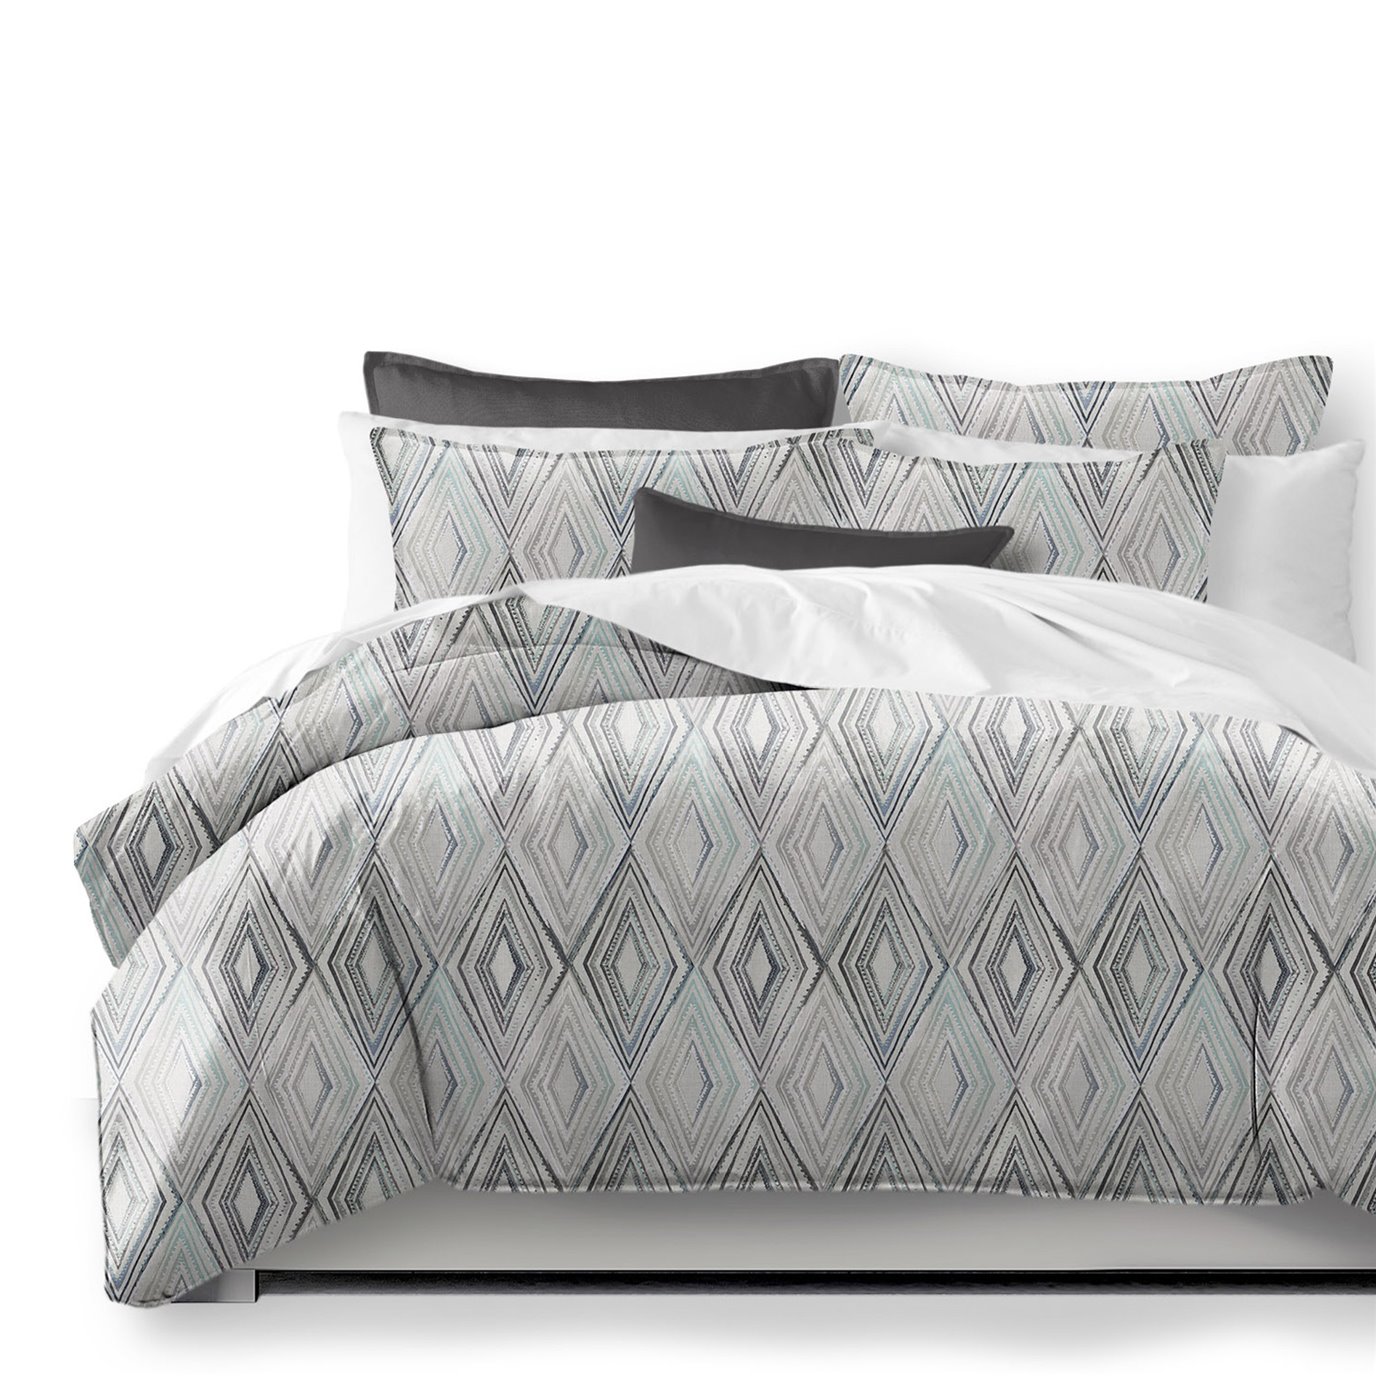 Sloane Seabreeze/Ivory Comforter and Pillow Sham(s) Set - Size Queen